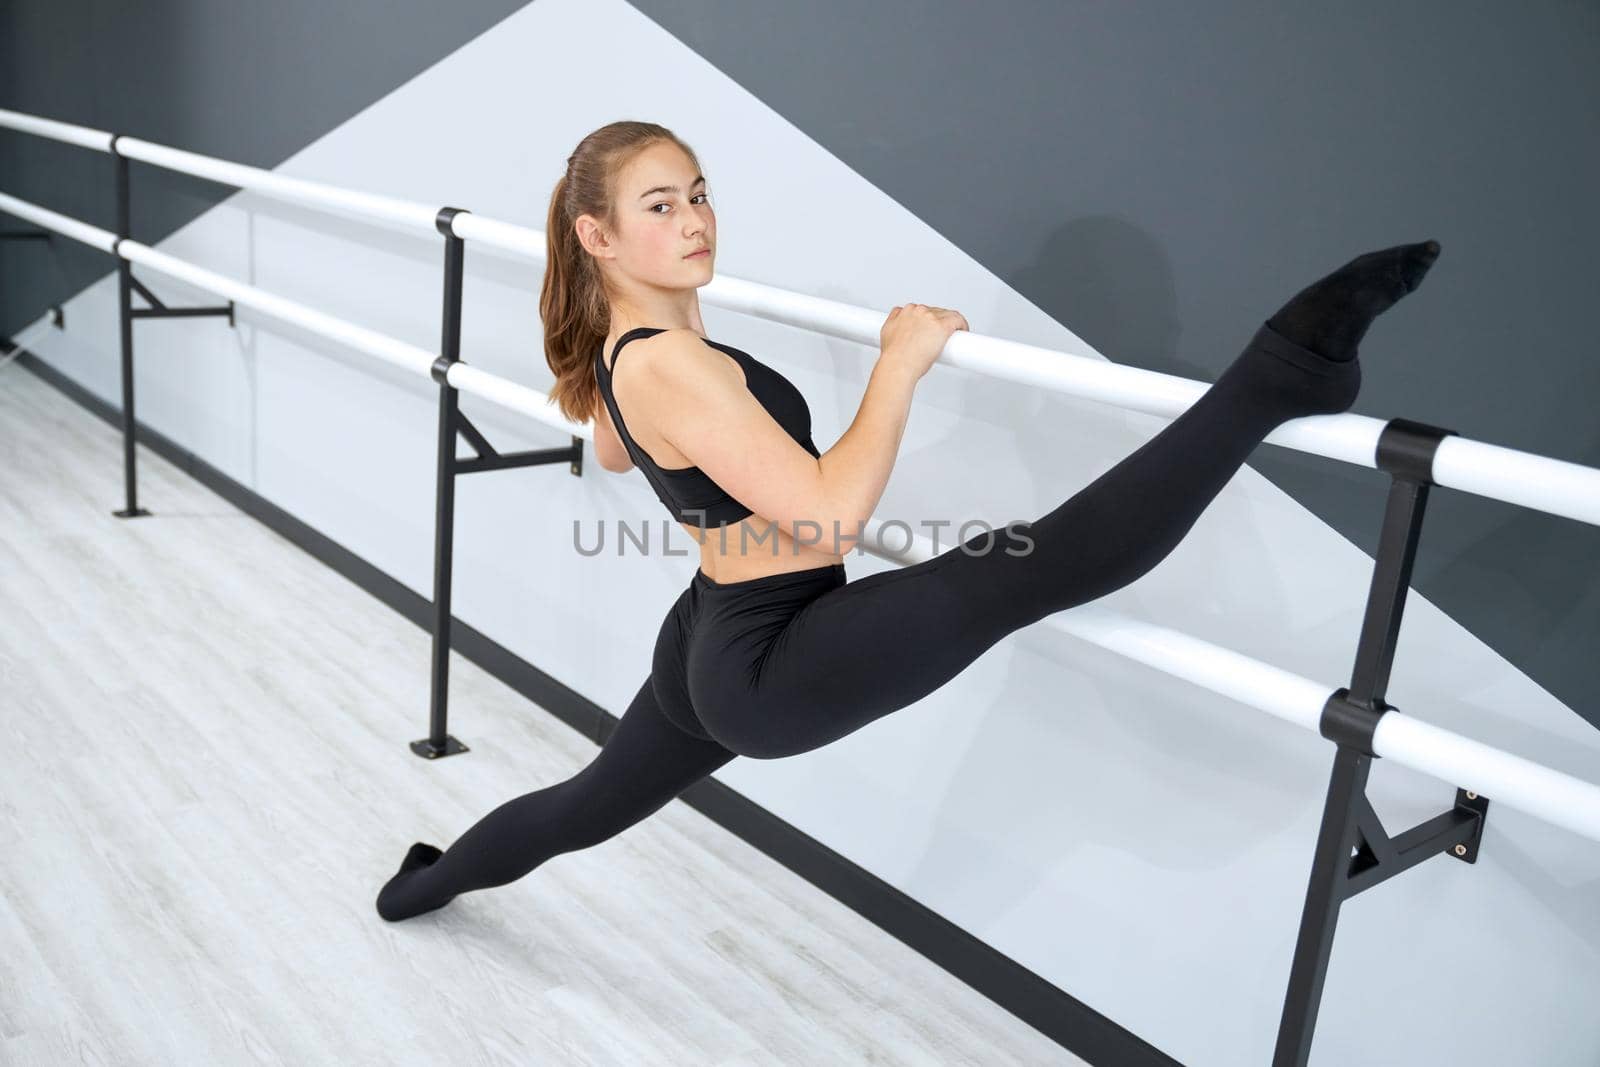 Beautiful teenager holding leg on handrail, looking at camera. Flexible female athlete wearing tight black sports clothes practicing split in empty dance hall. Concept of gymnastics, sport.